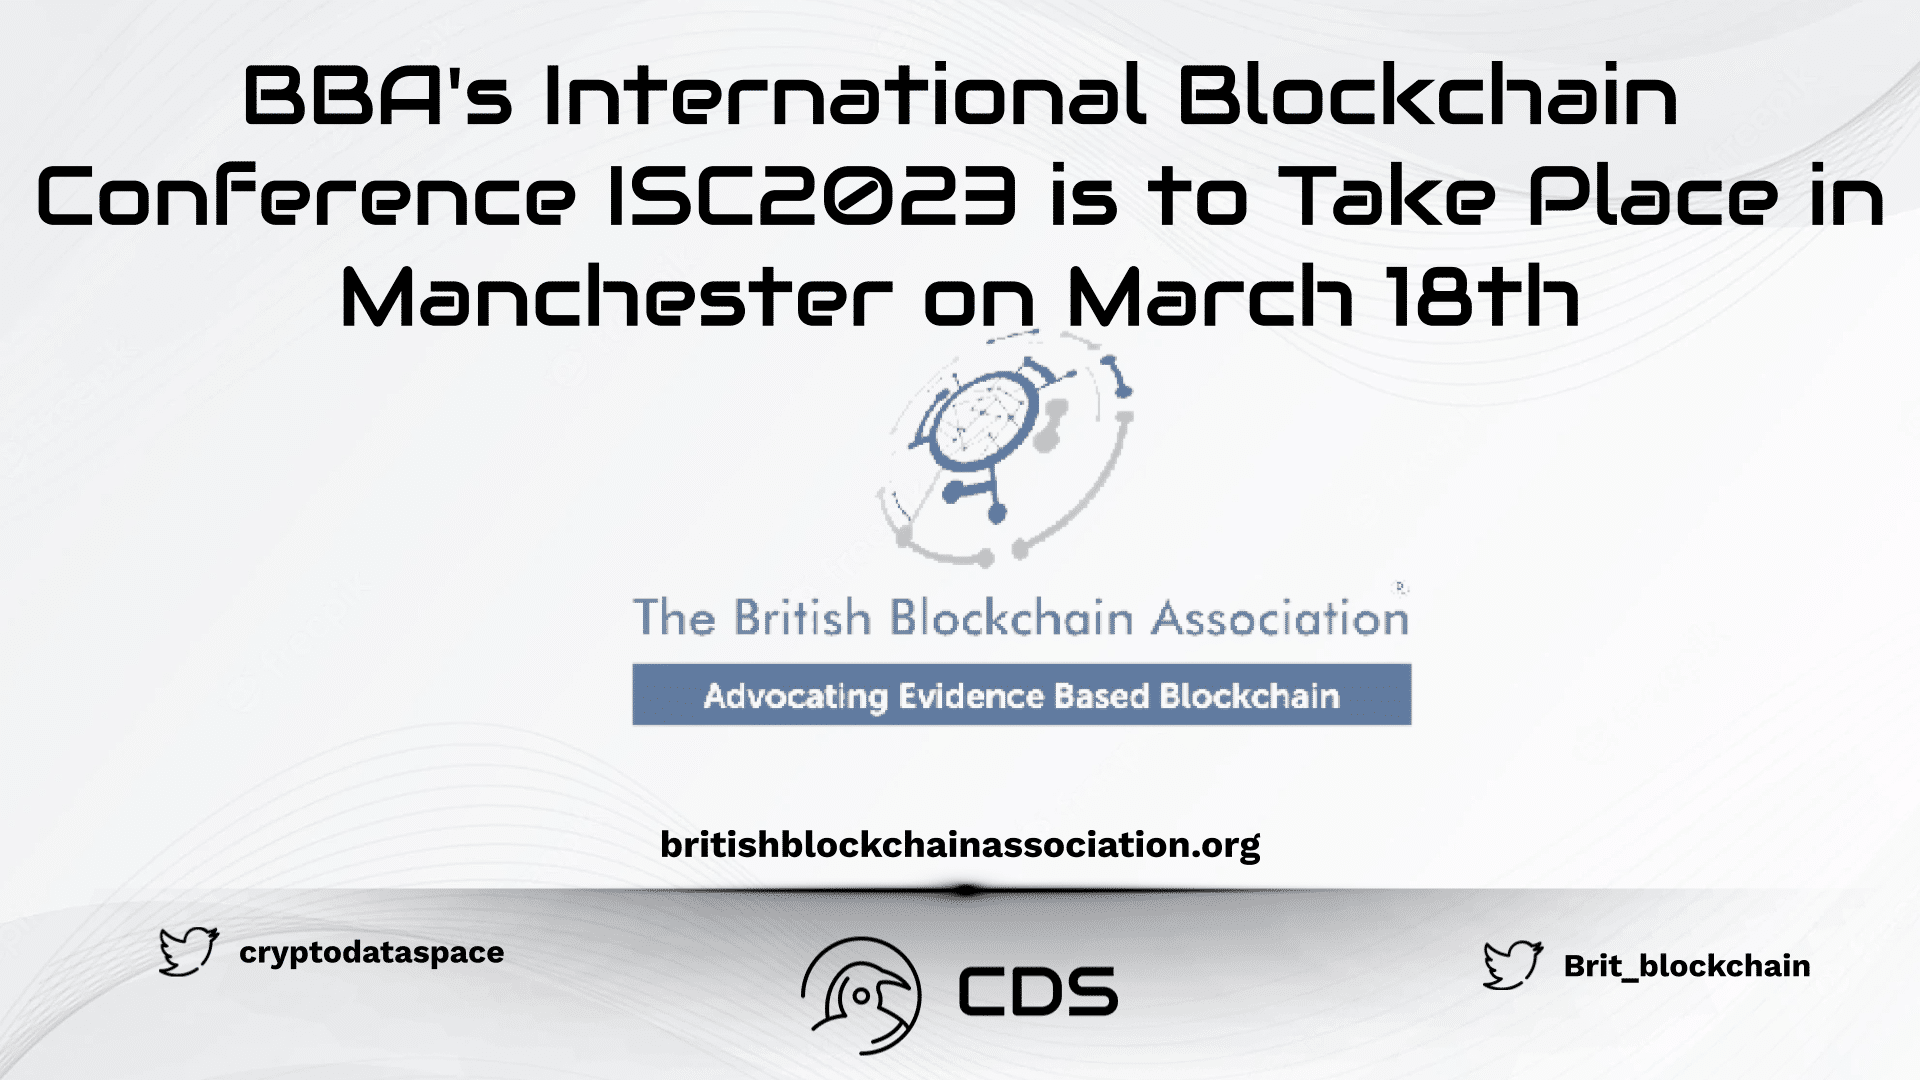 BBA's International Blockchain Conference ISC2023 is to Take Place in Manchester on March 18th